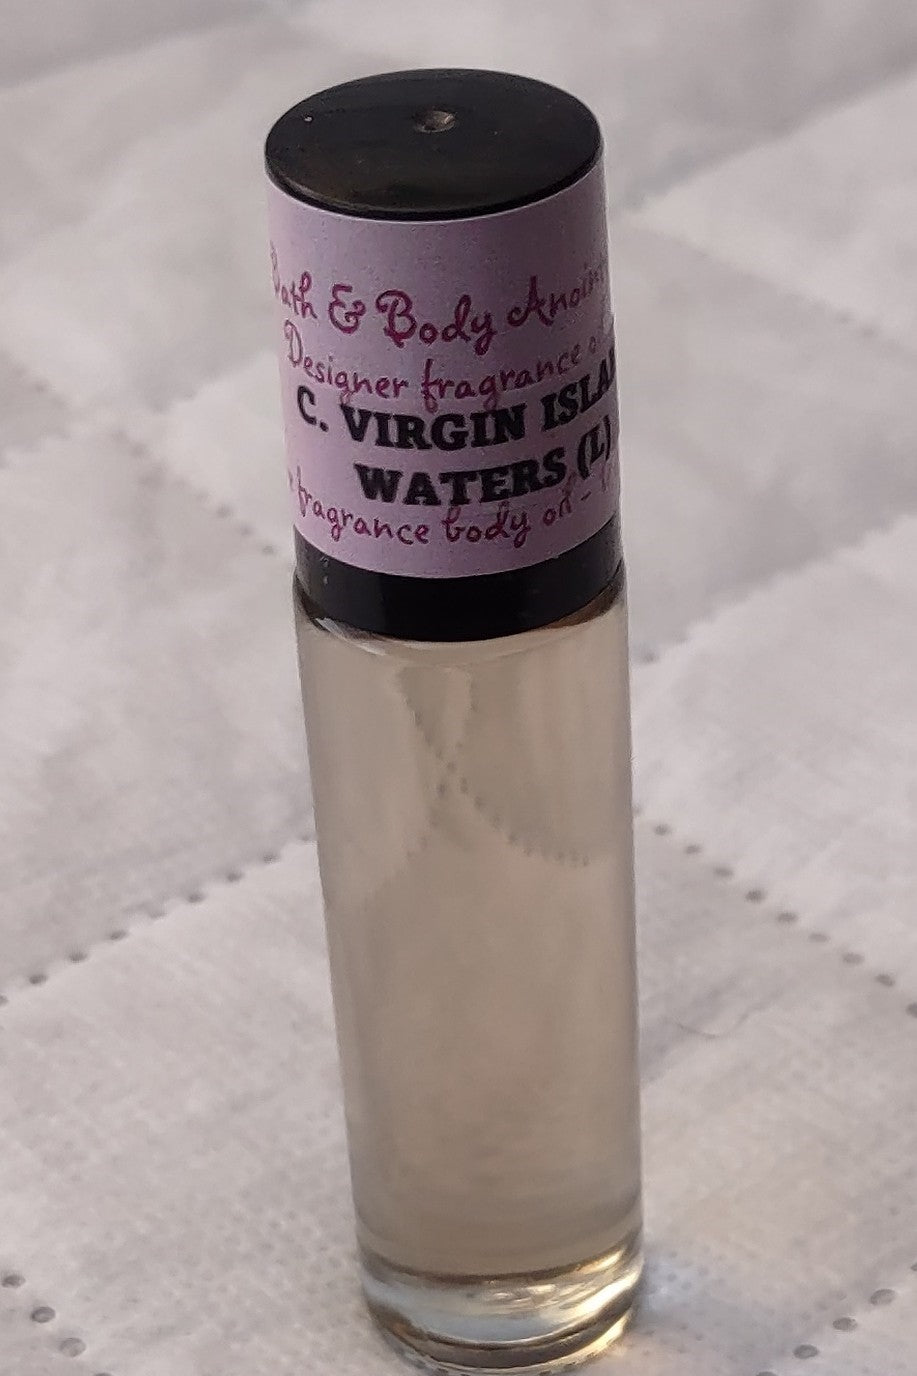 C. Virgin Island Waters for women - our impression.